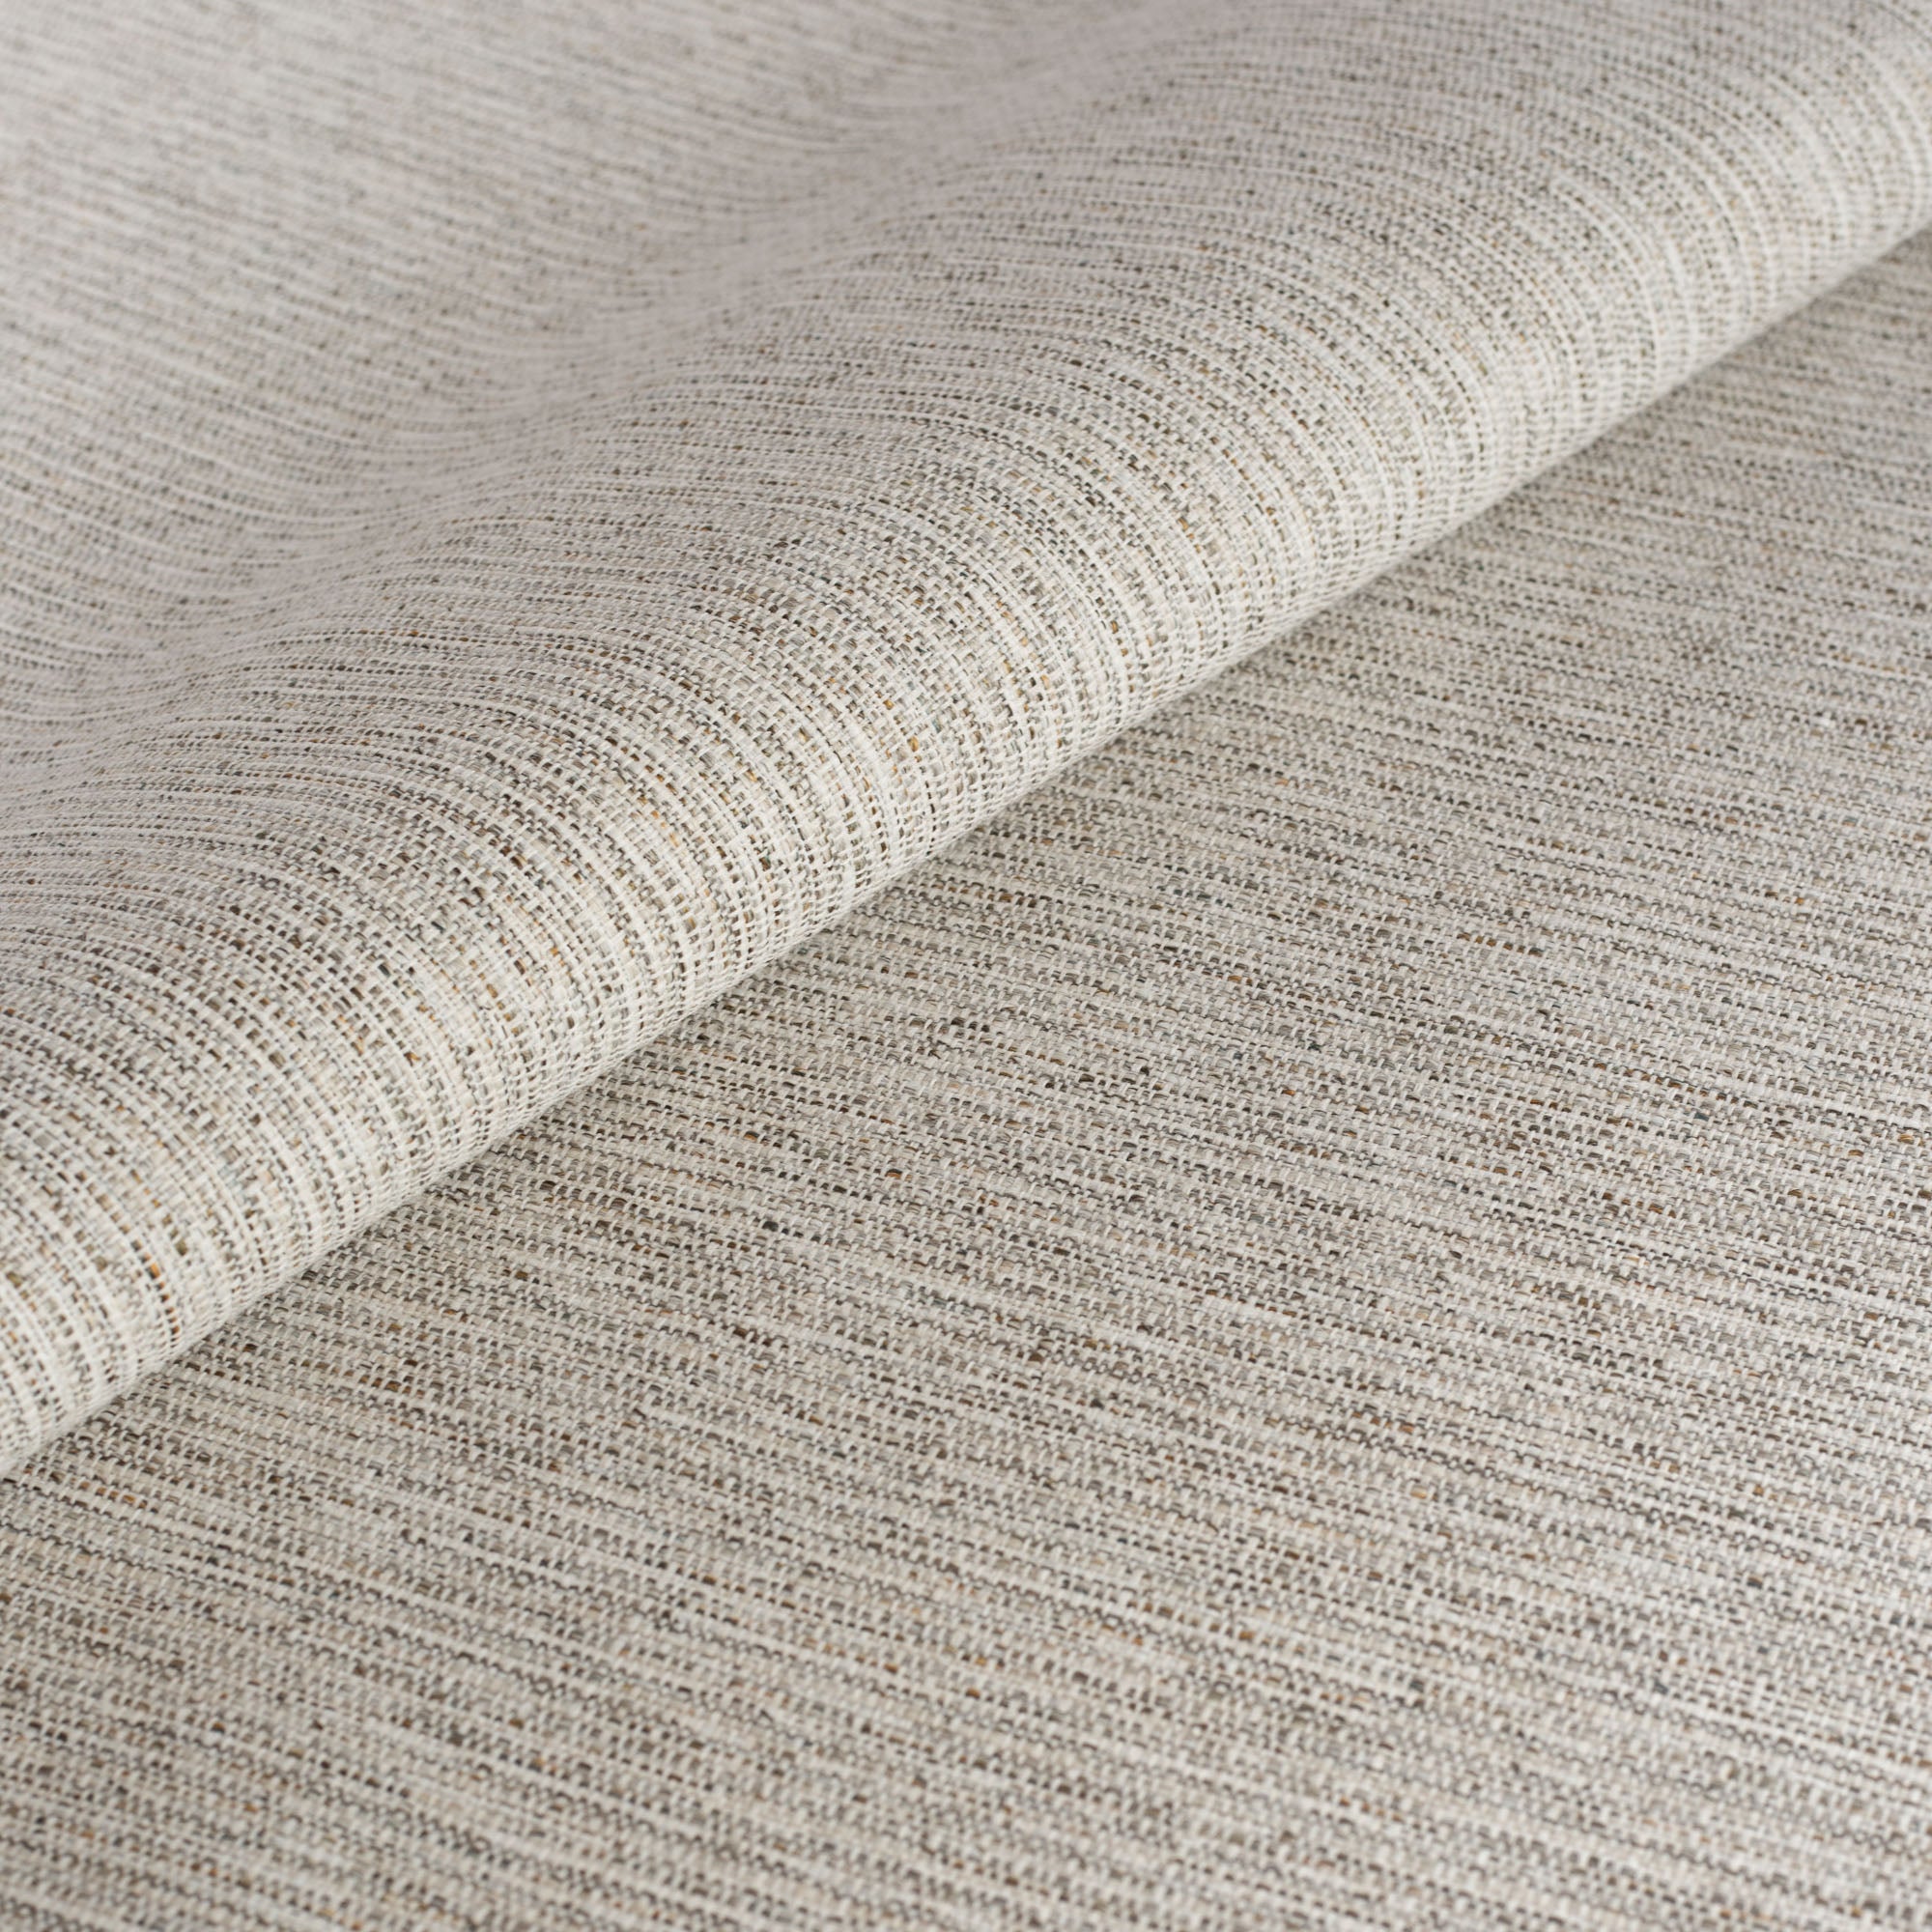 Arthur Tweed, a warm gray upholstery fabric from Tonic Living